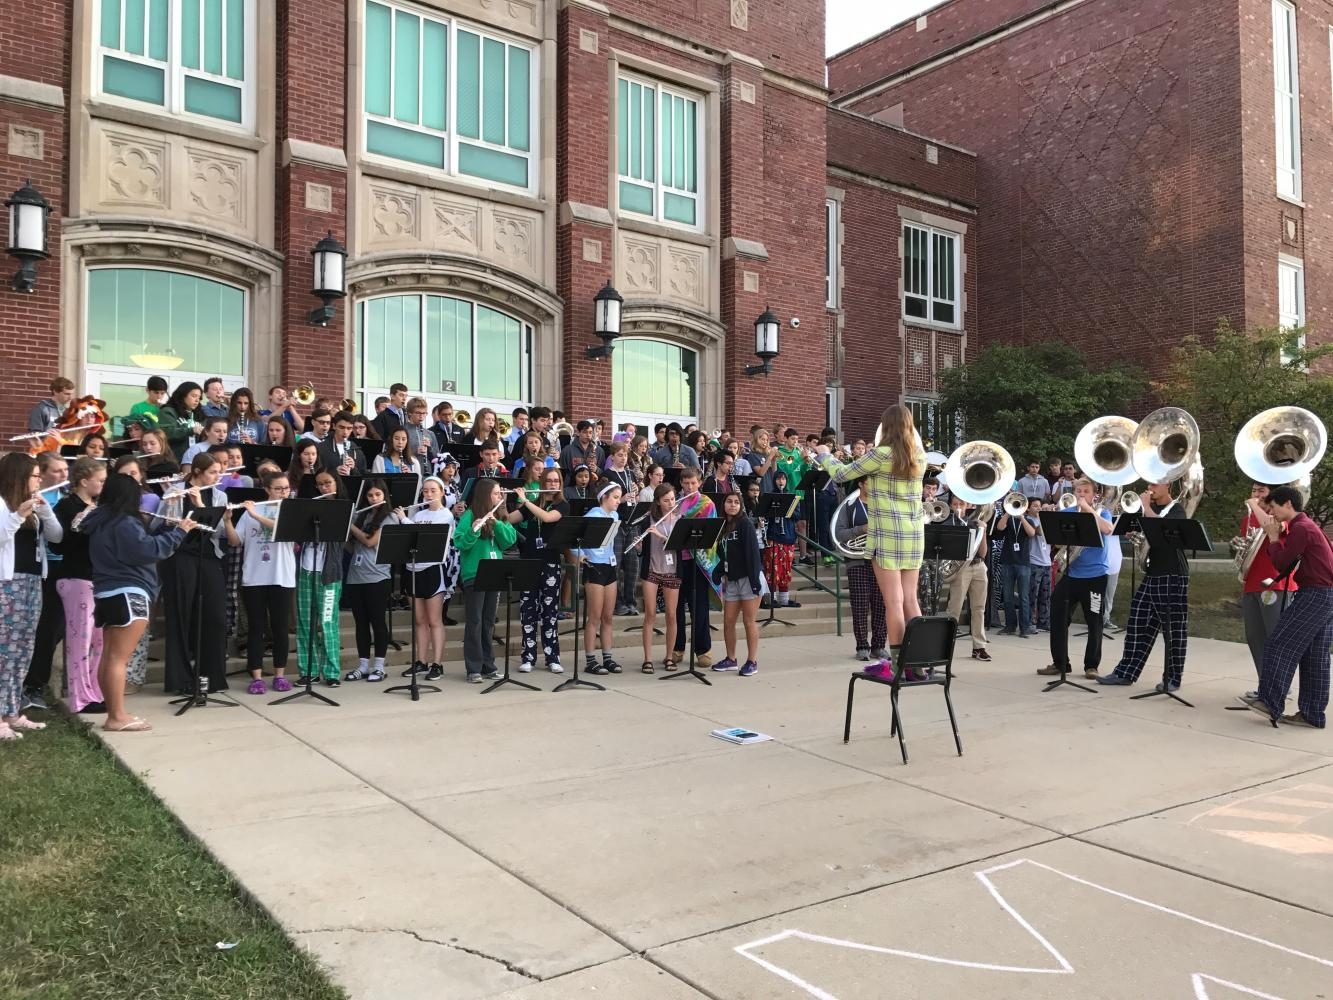 The York marching band plays in front of the school Monday to kick off Homecoming week. 